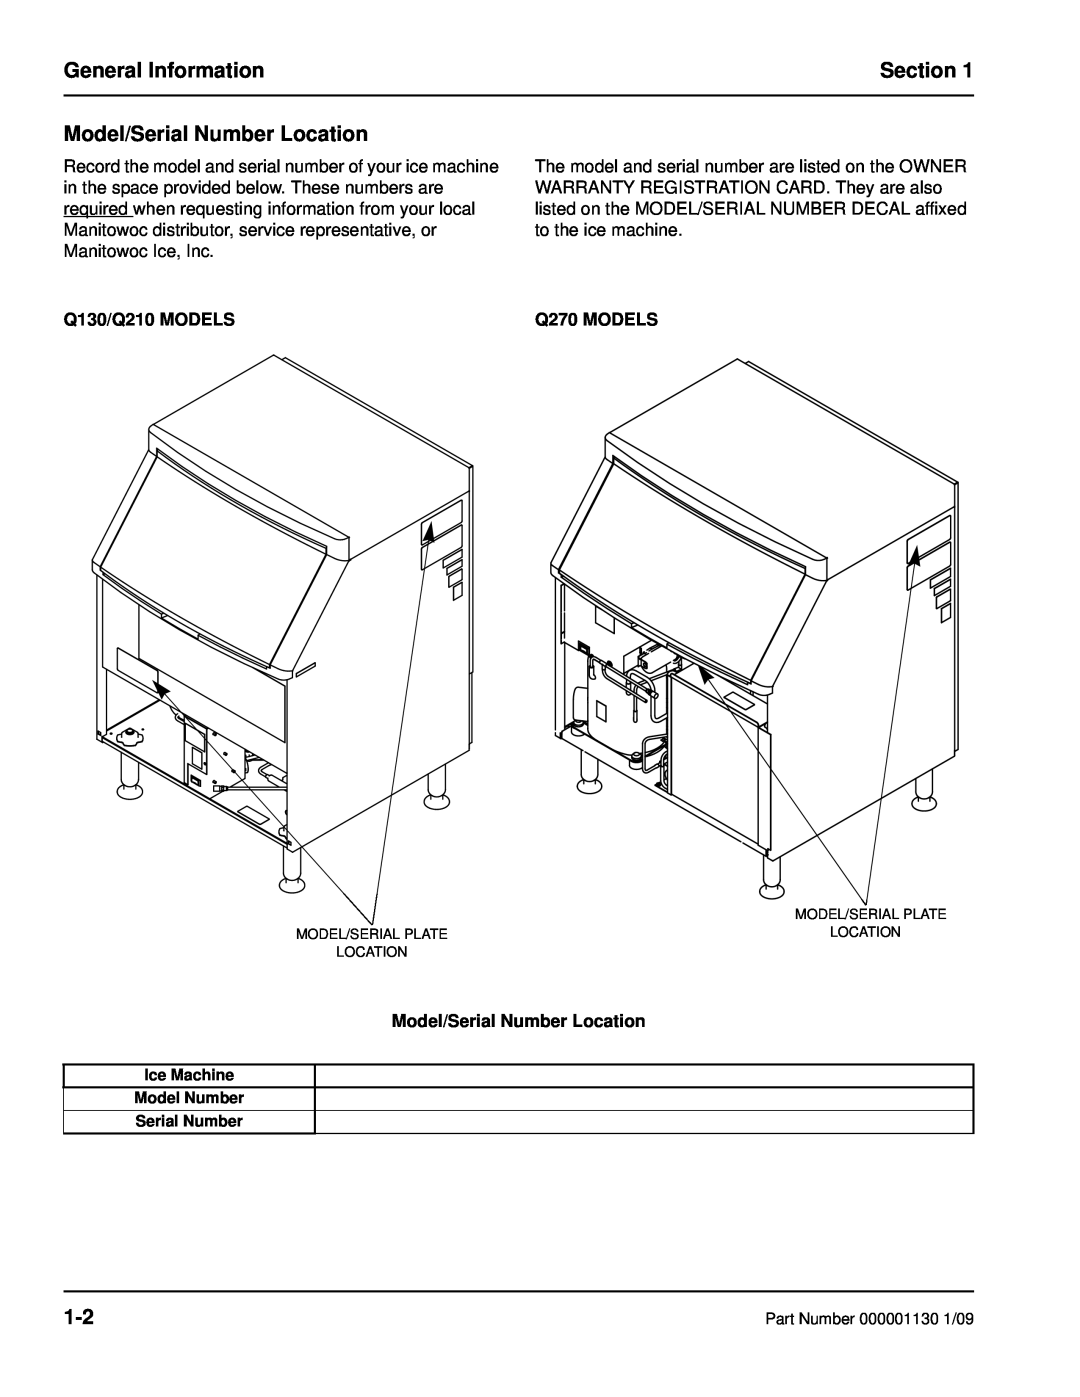 Manitowoc Ice manual General Information, Section, Model/Serial Number Location, Q130/Q210 MODELS, Q270 MODELS 